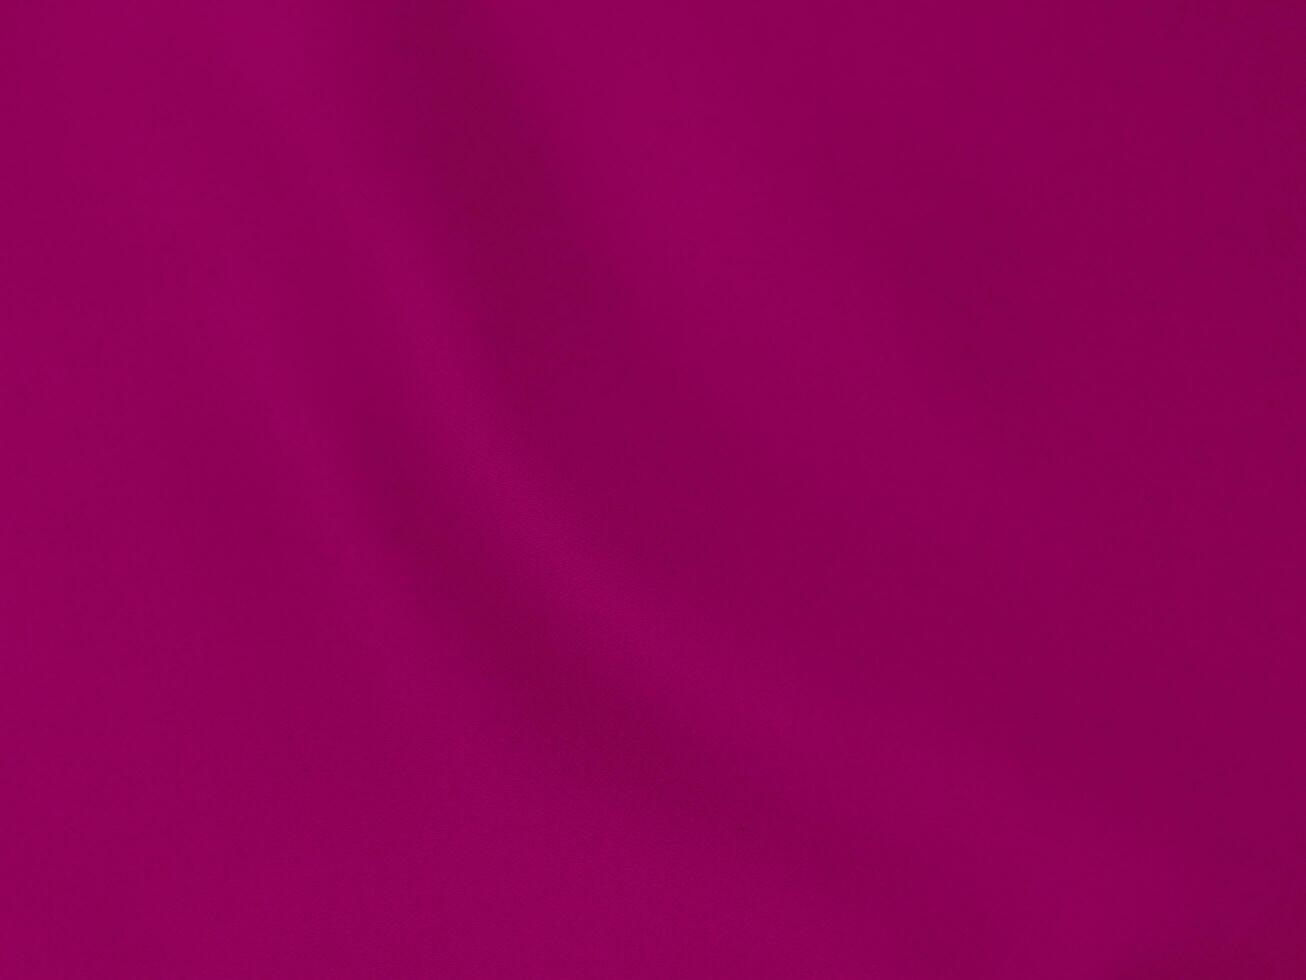 Pink velvet fabric texture used as background. pink fabric background of soft and smooth textile material. There is space for text. photo